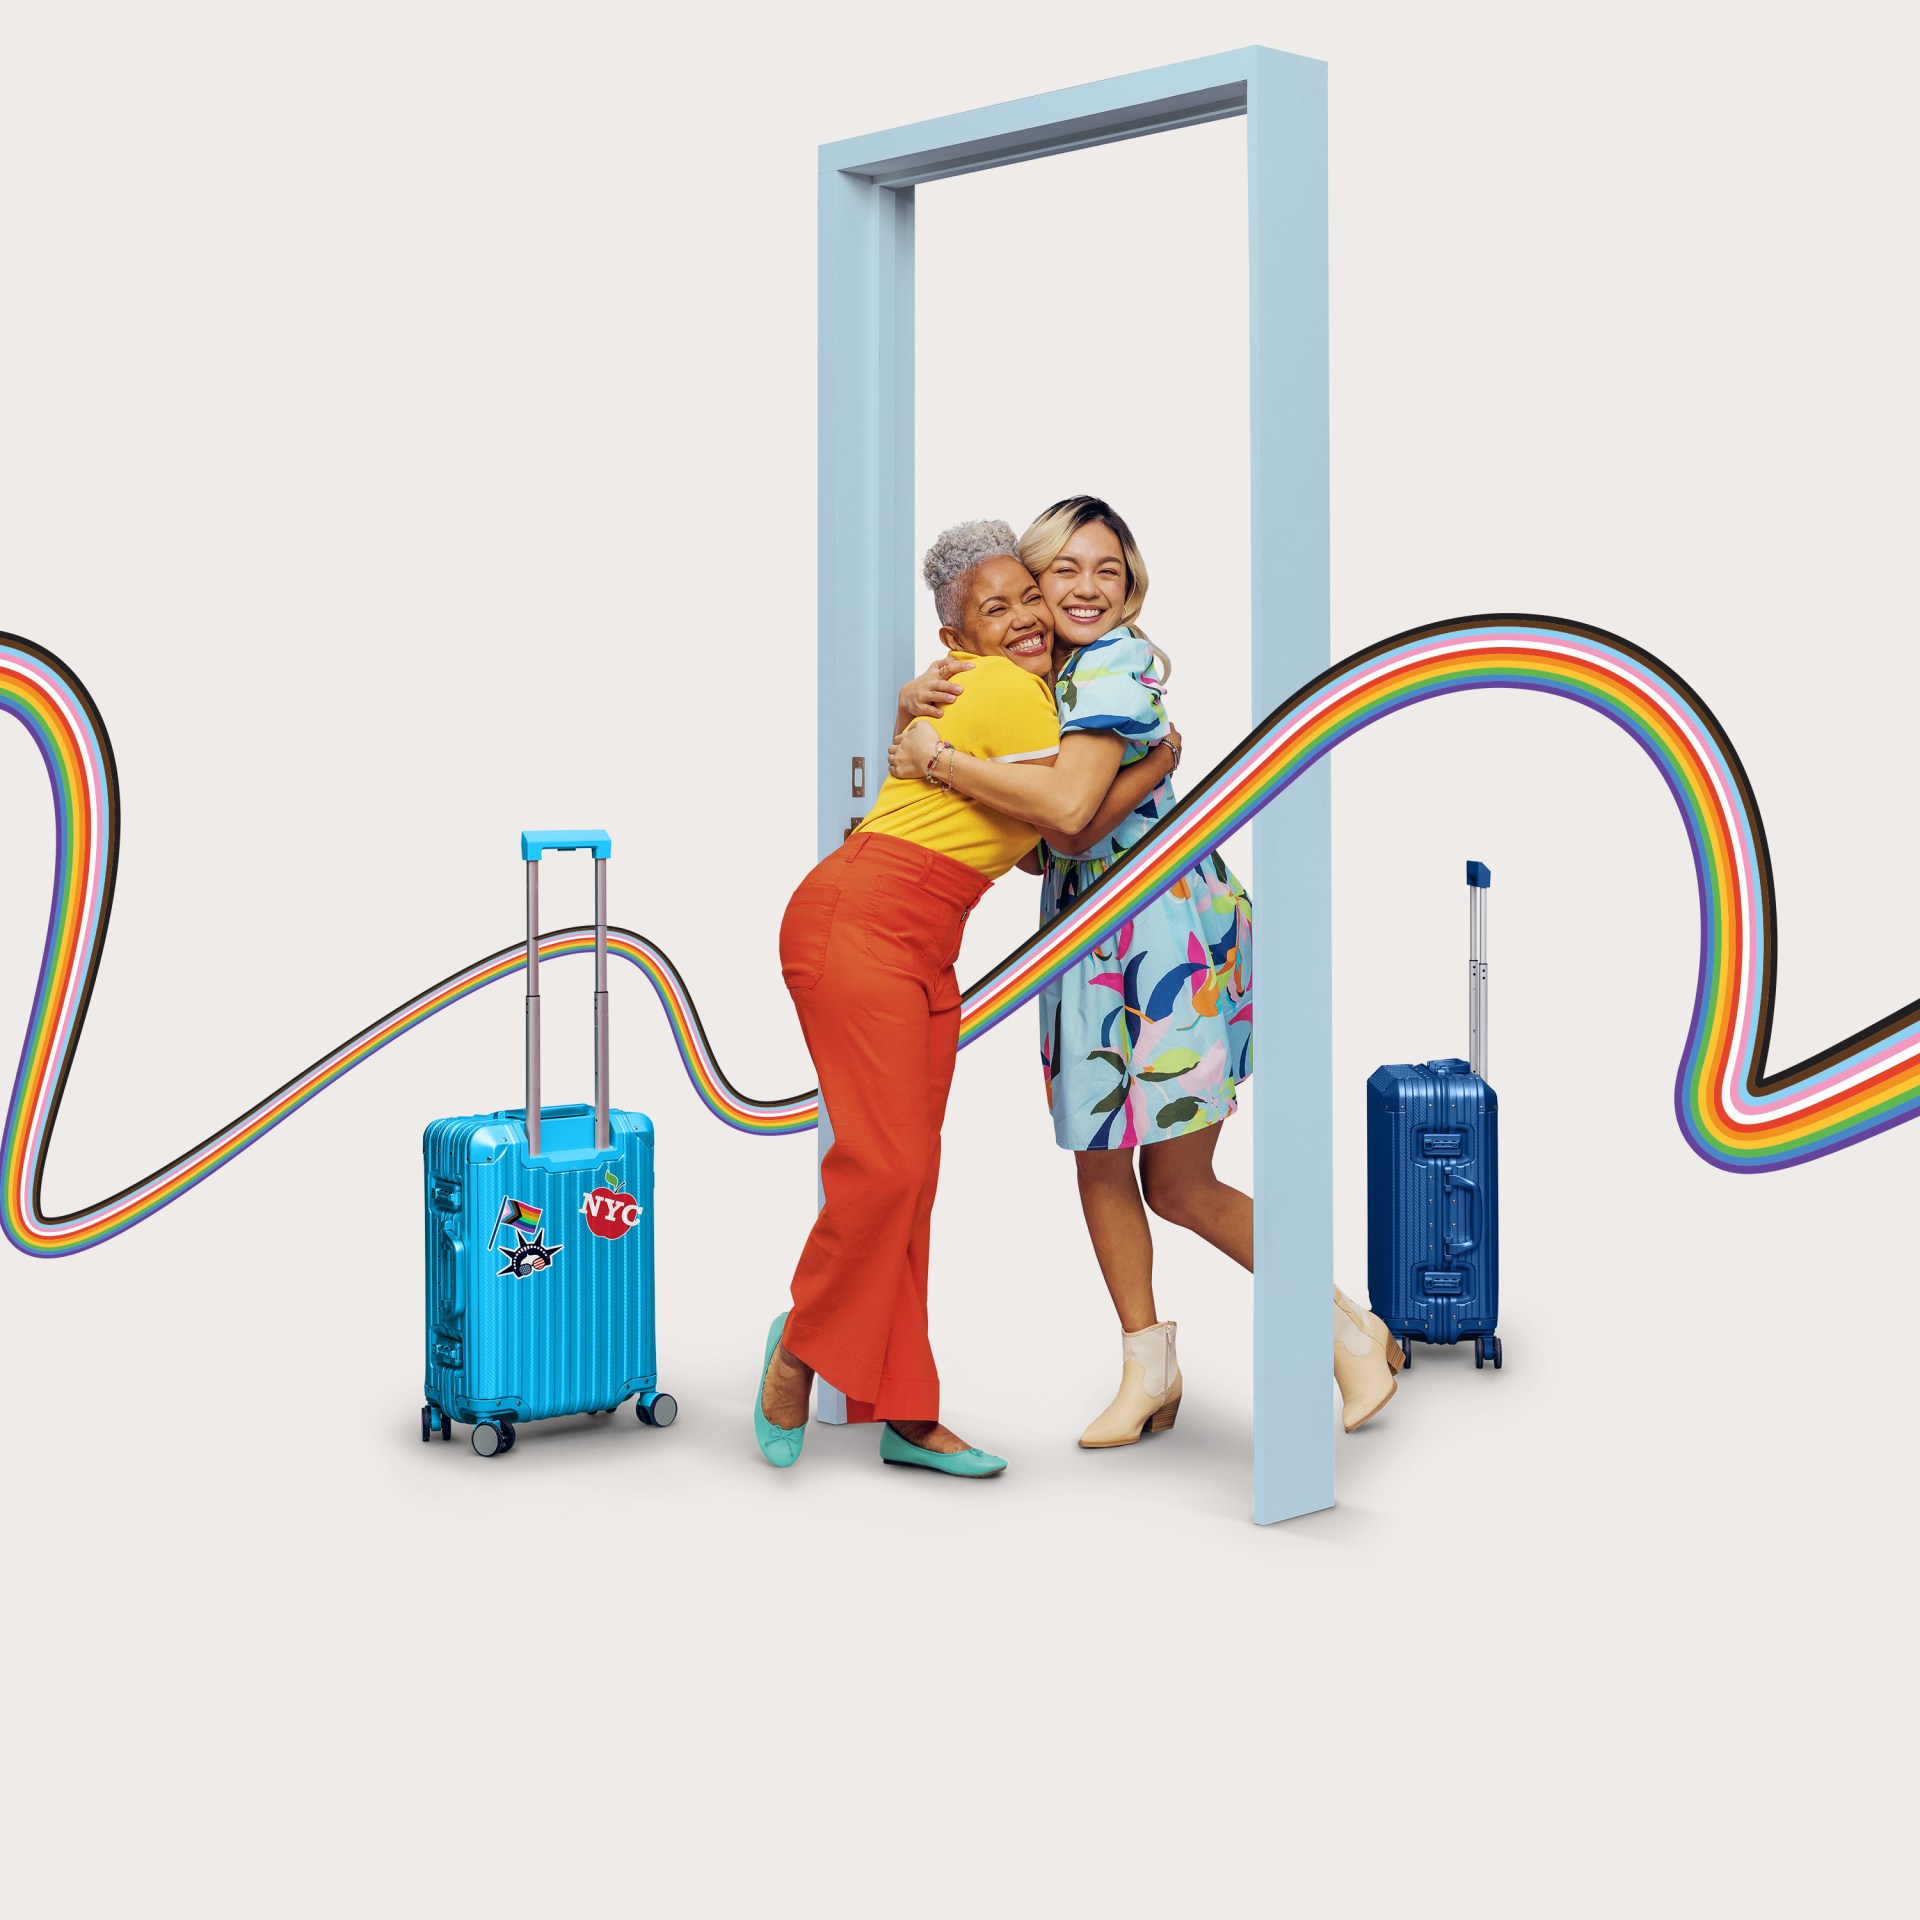 Women hugging with suitcases and rainbow